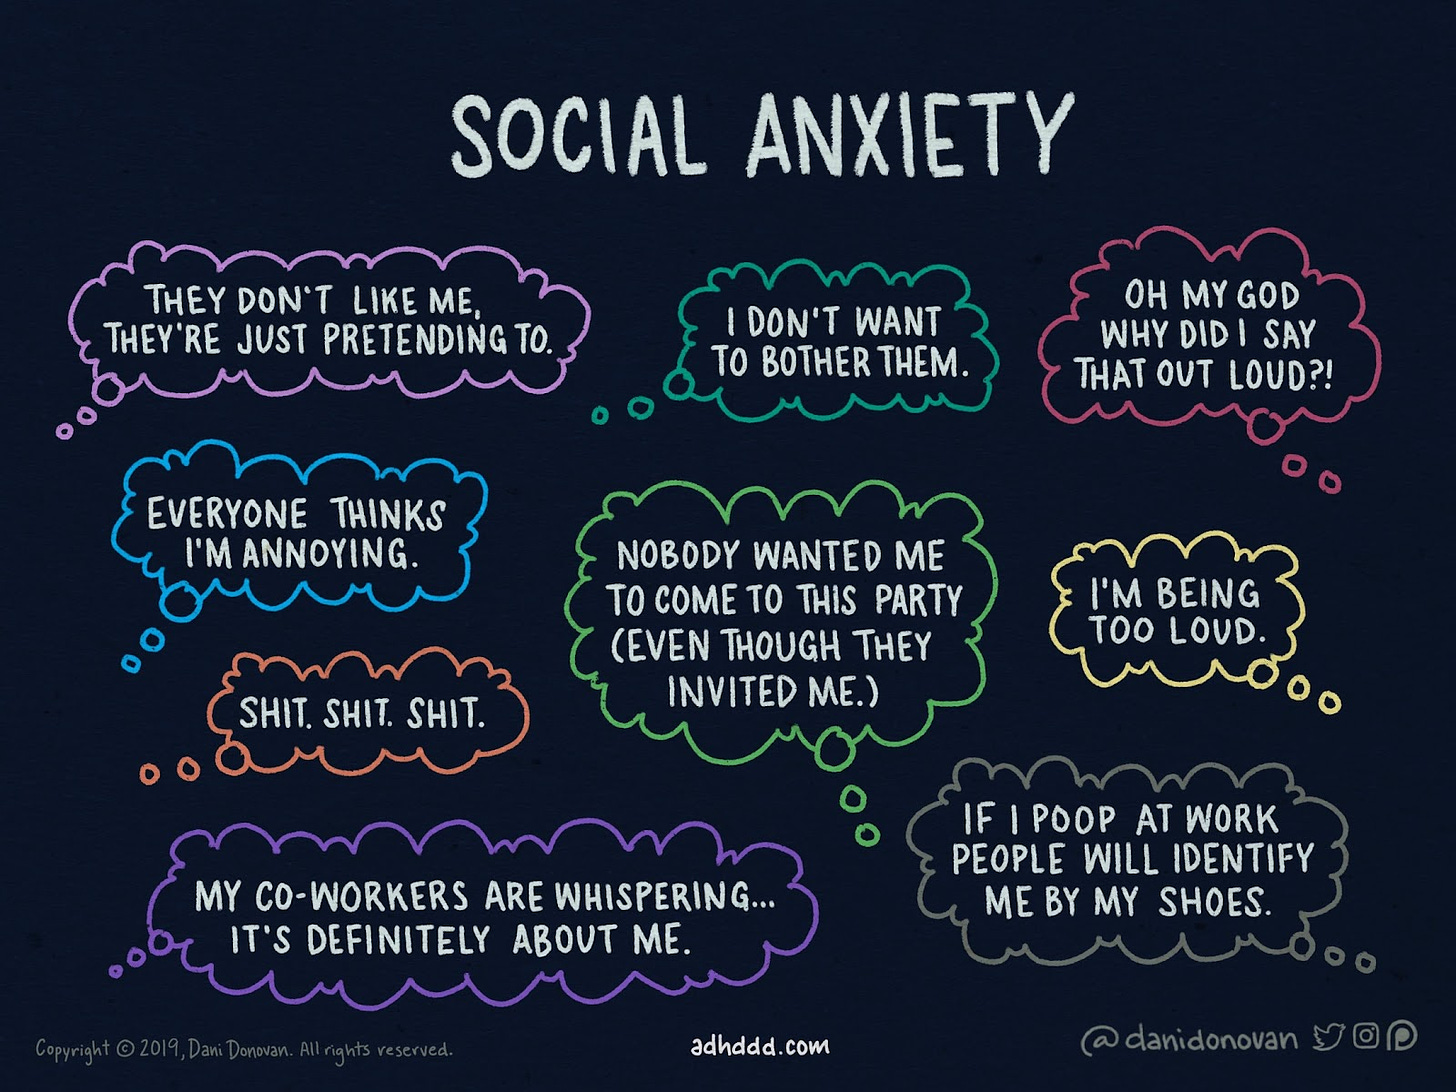 Image with various quotes of social anxiety such as "shit. shit. shit." and "If I poop at work people will ID me by my shoes"